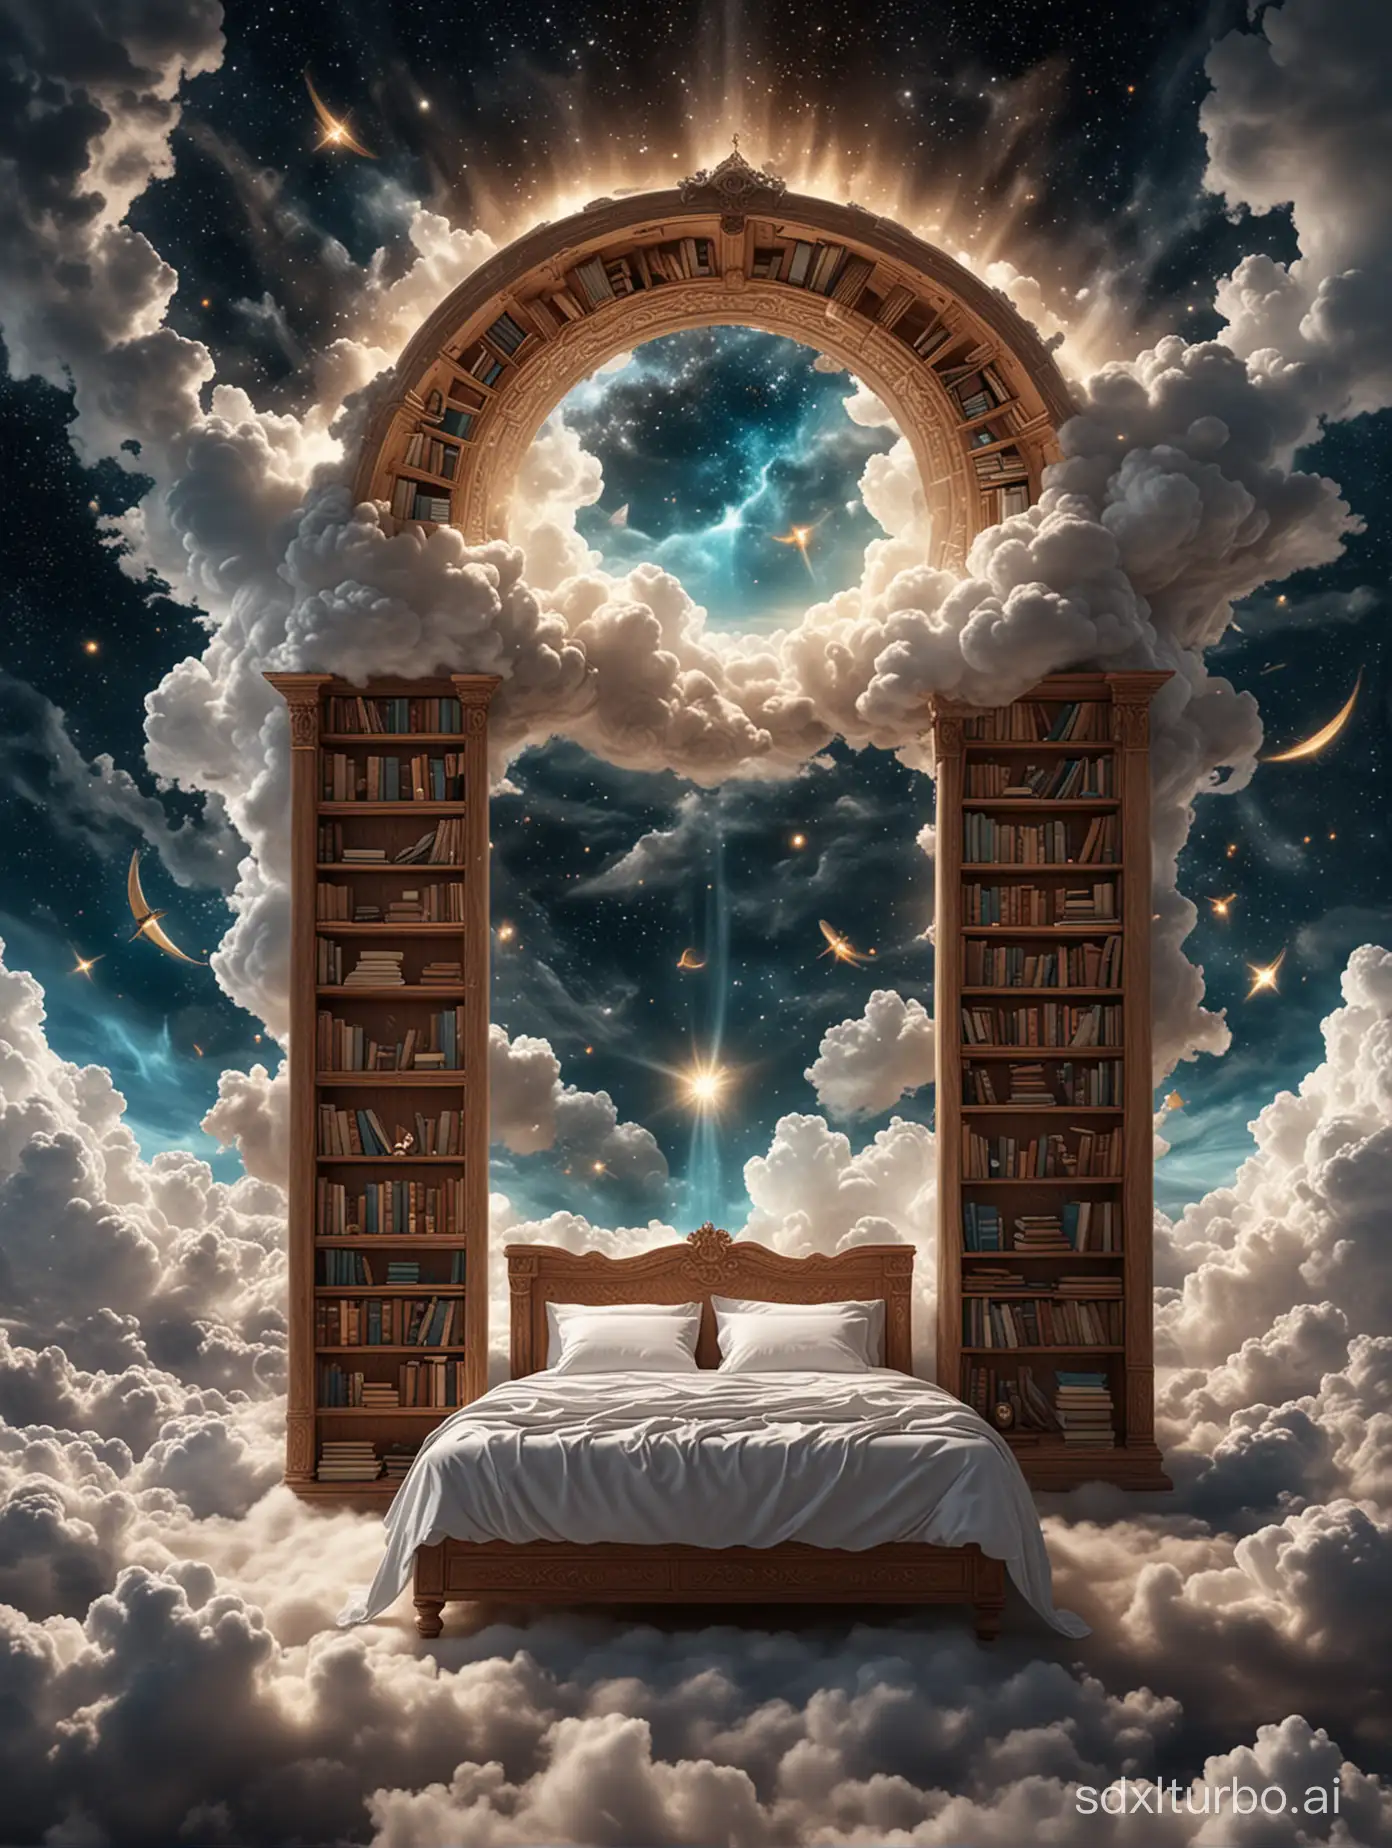 Celestial-Bed-Among-Clouds-with-Towering-Heavenly-Bookshelves